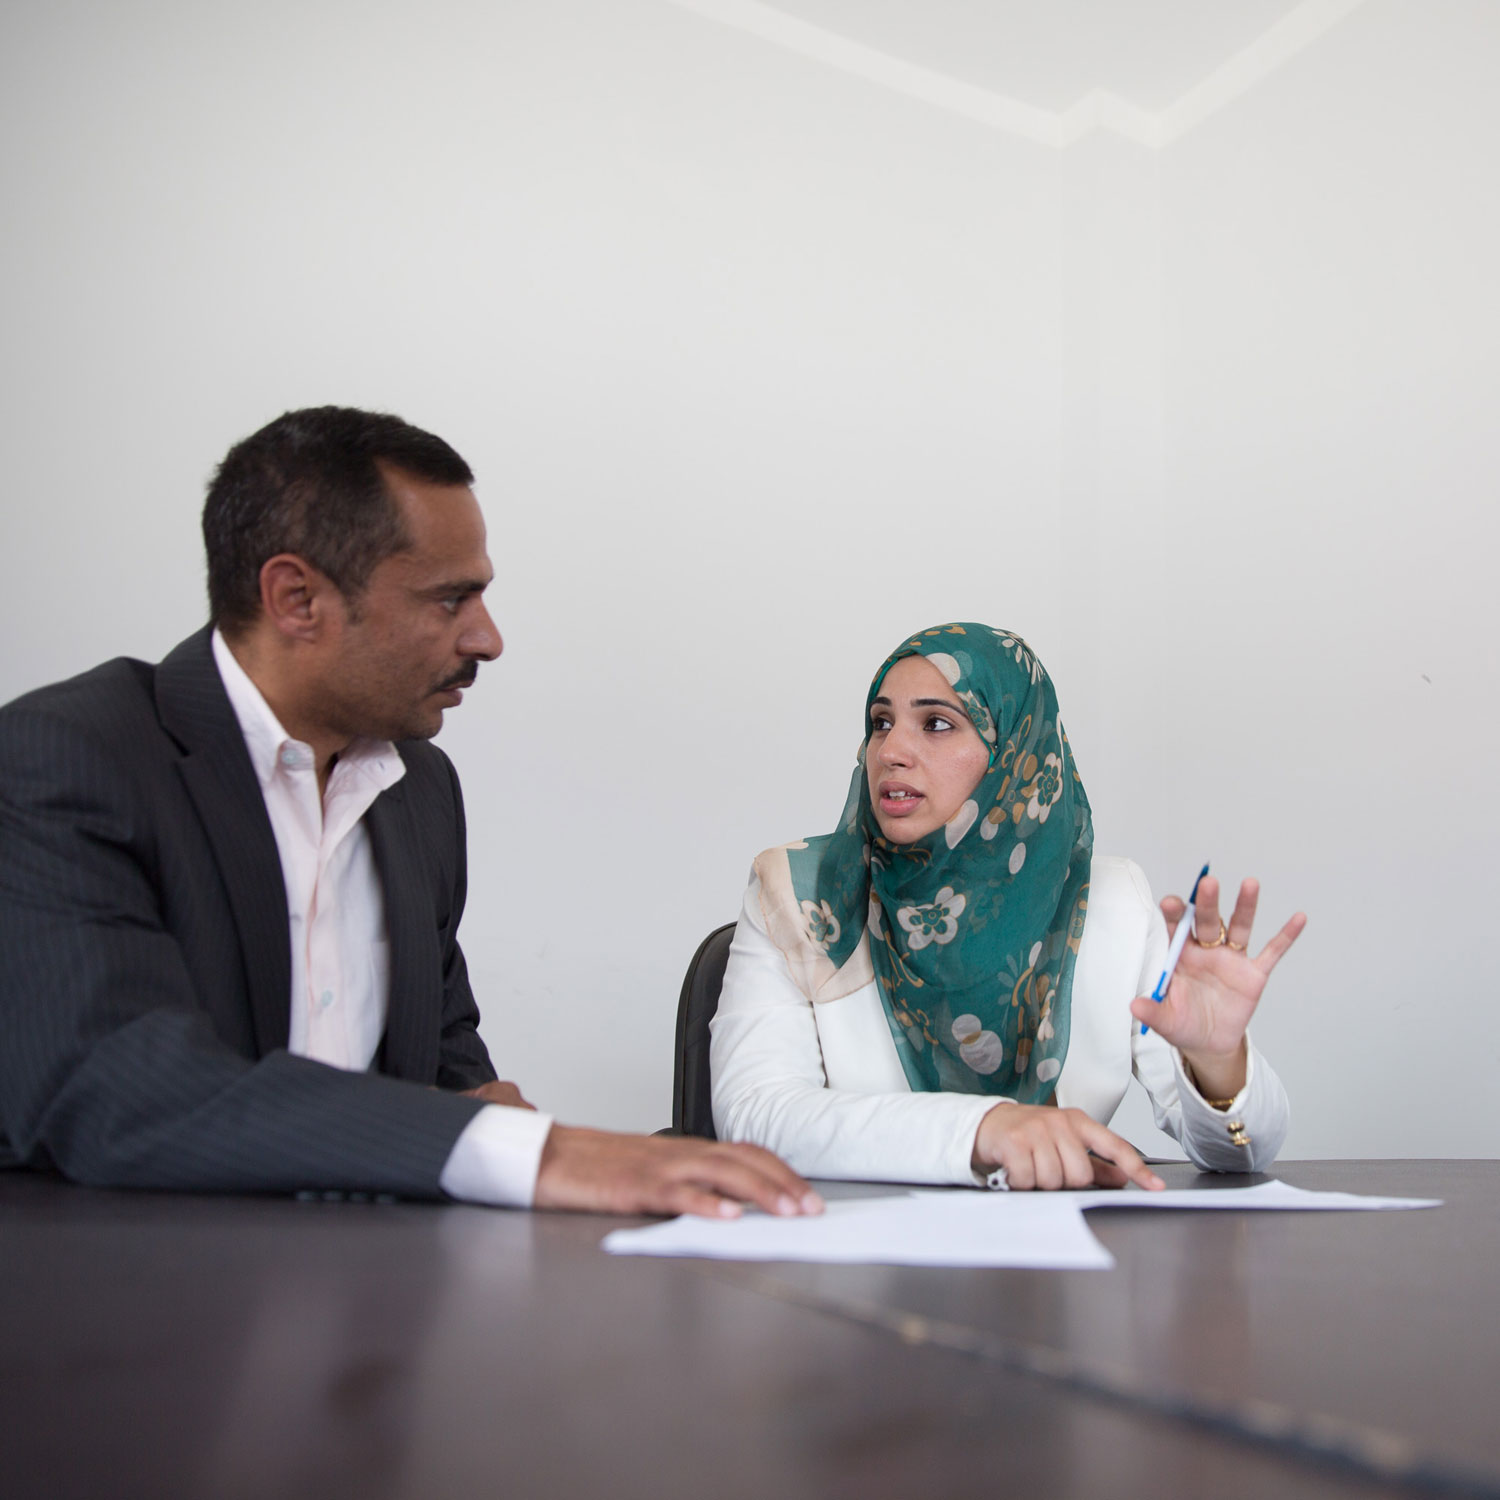  Heba’s manager Essam Ahmed has believed in her since she started working with the company 5 years ago. He trained her and supported her along the way.   Photo for USAID/Egypt.  